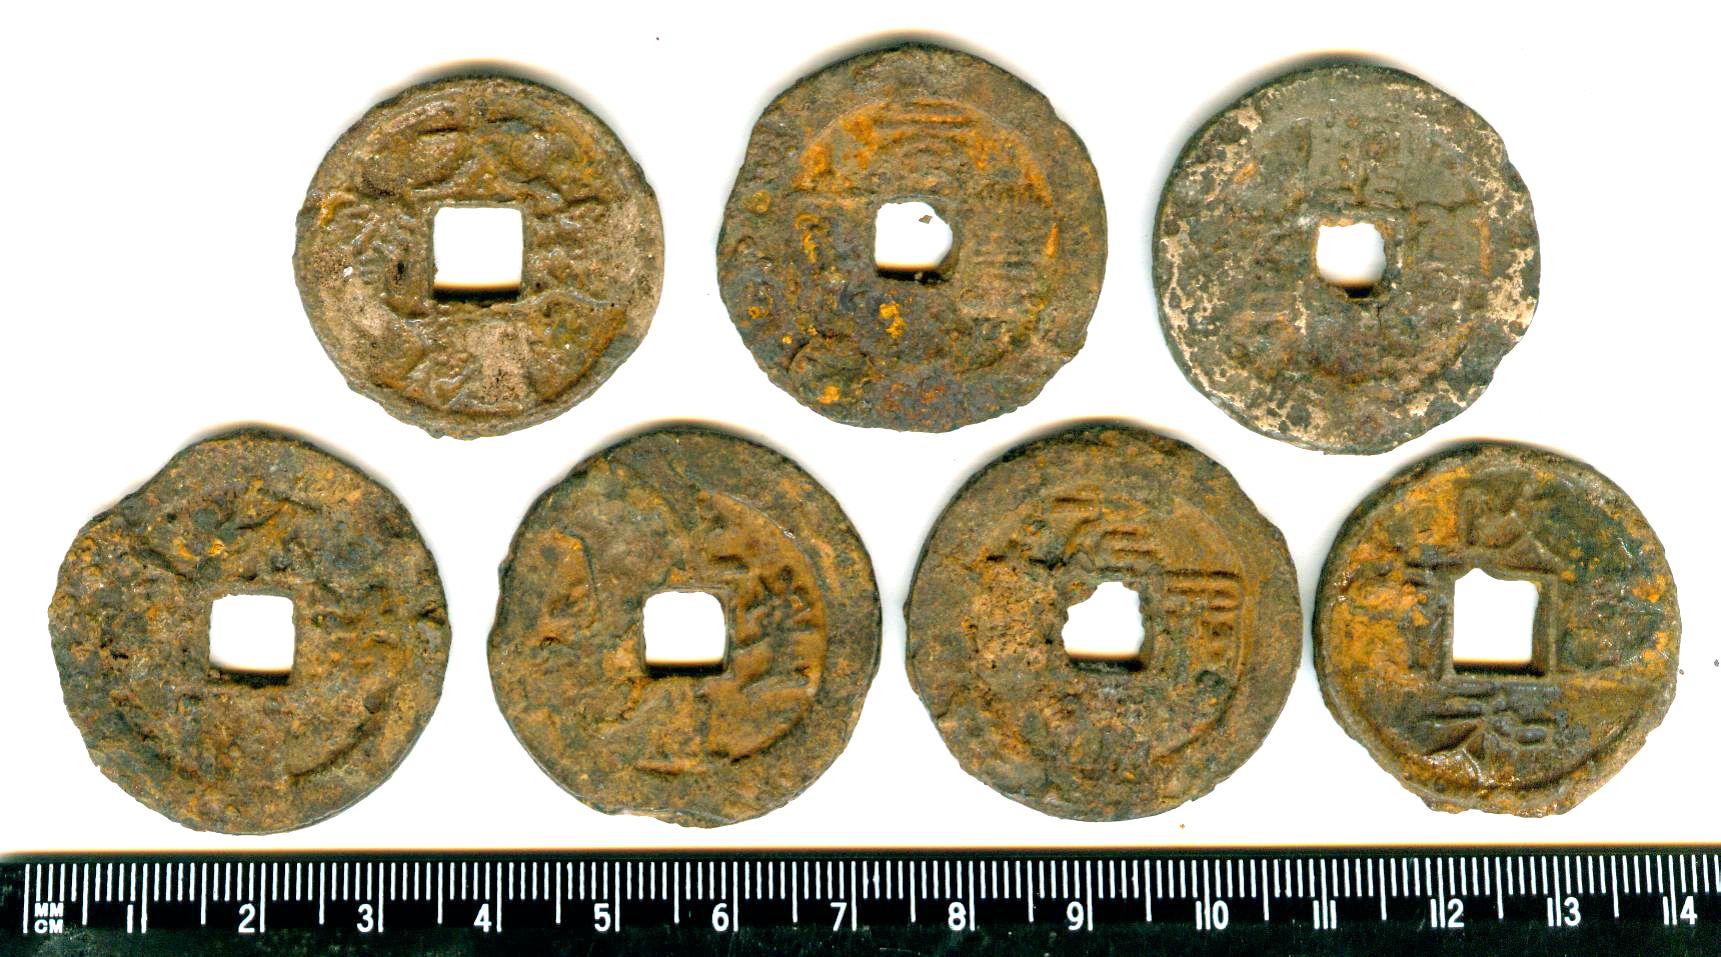 K8801, Chinese's Ancient Iron Coins, 7 Pcs Different, AD 1000-1100 China